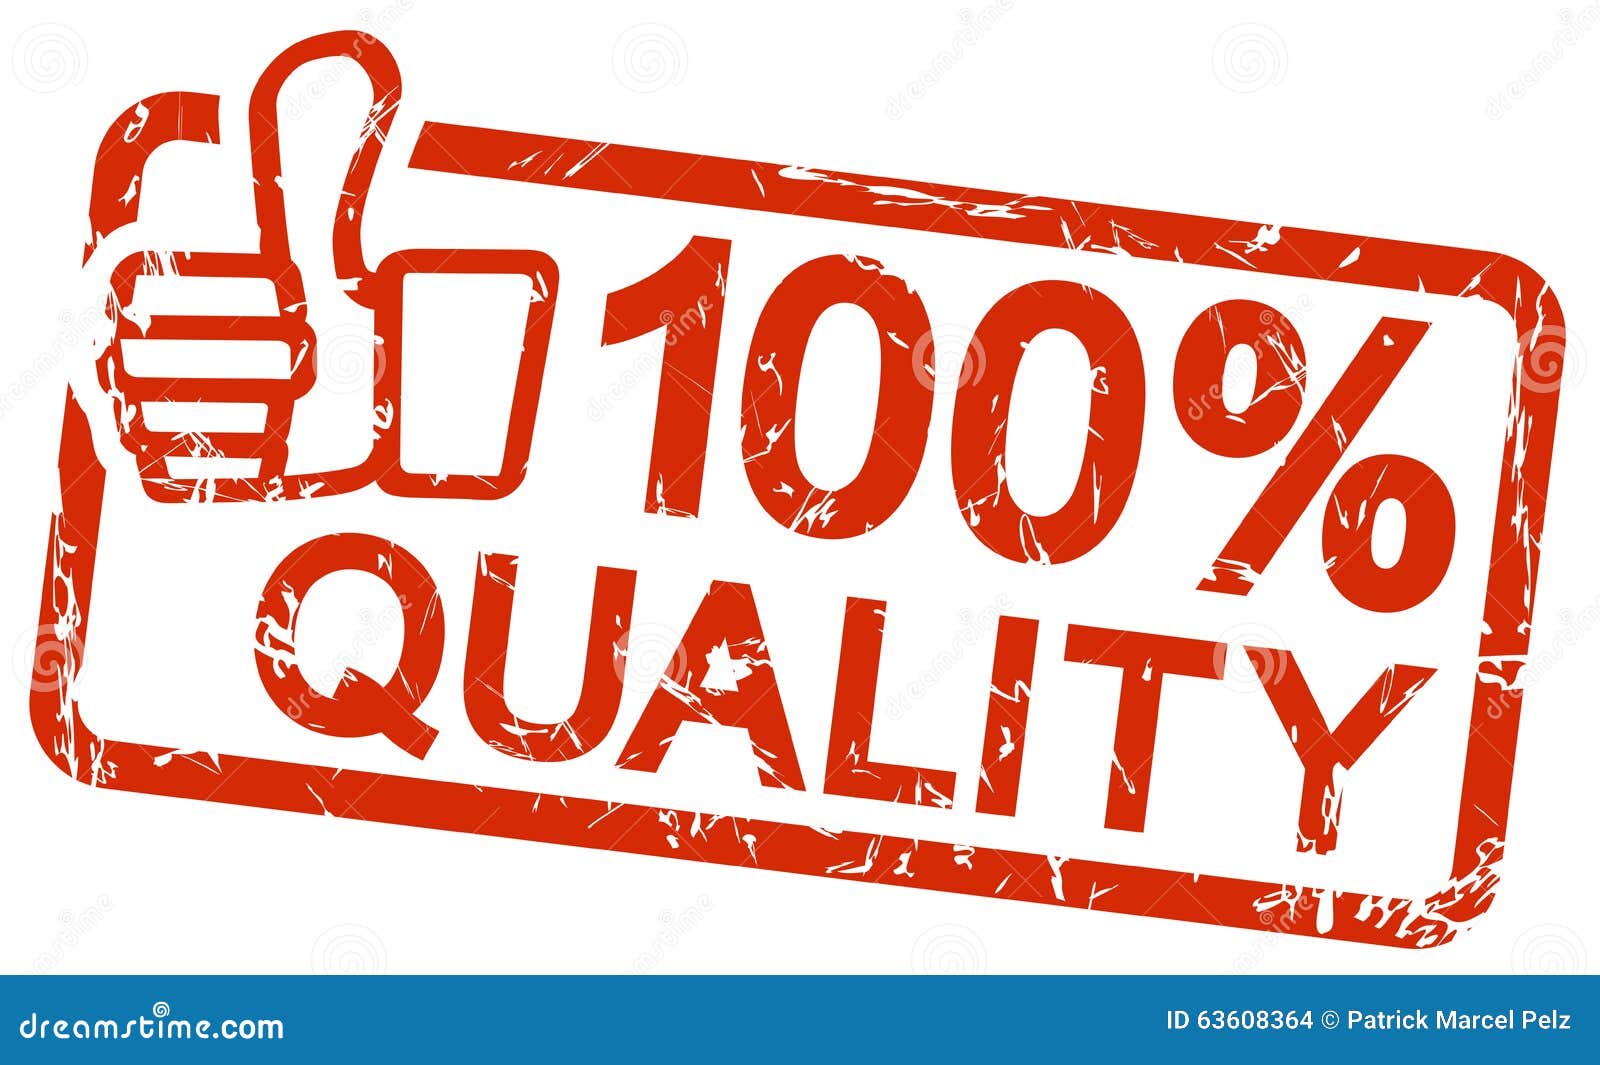 free quality clipart images - photo #35